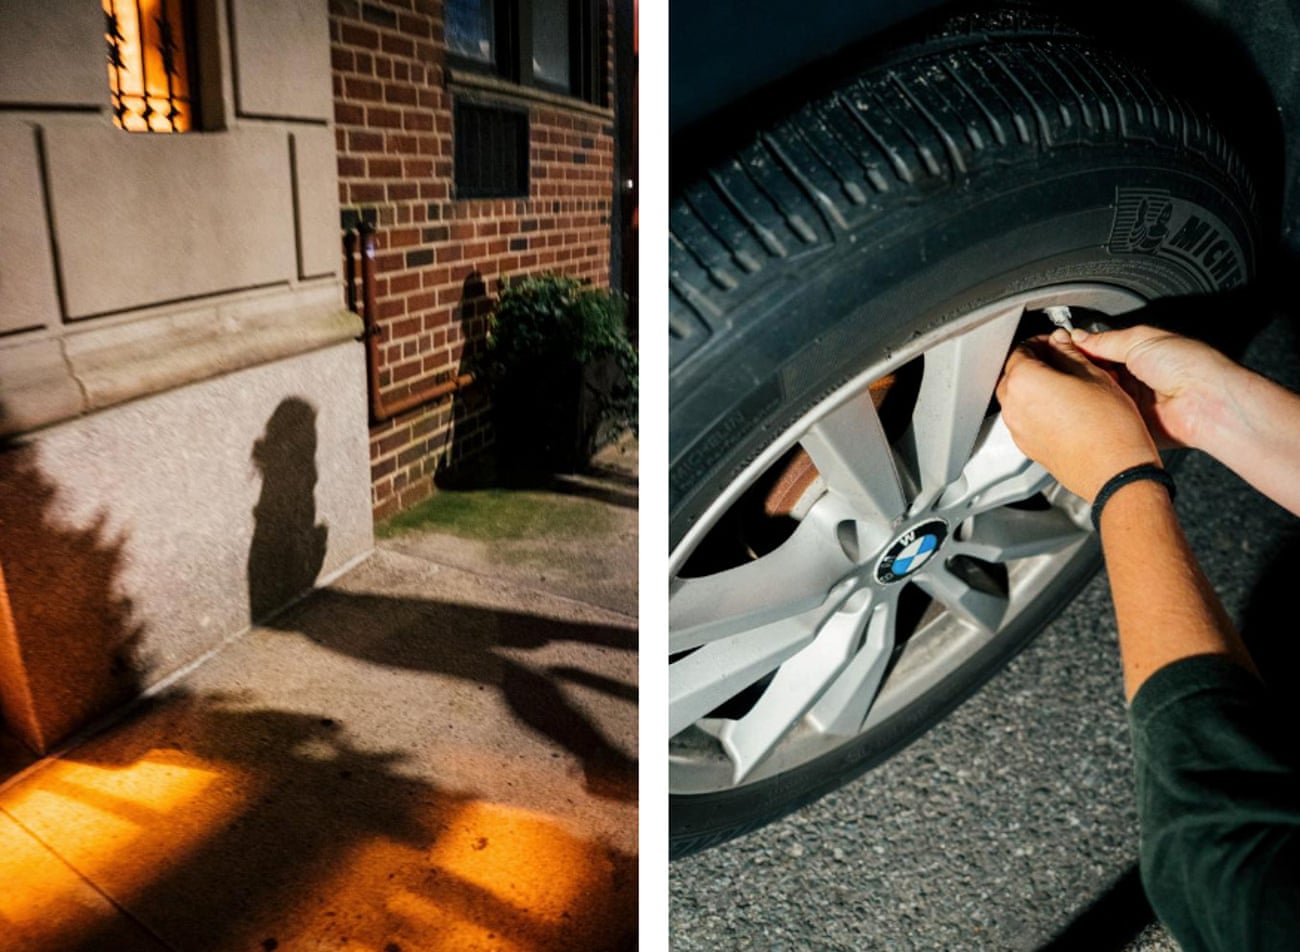 Left: A shadow of a person at night. Right: Hands deflating a BMW tire